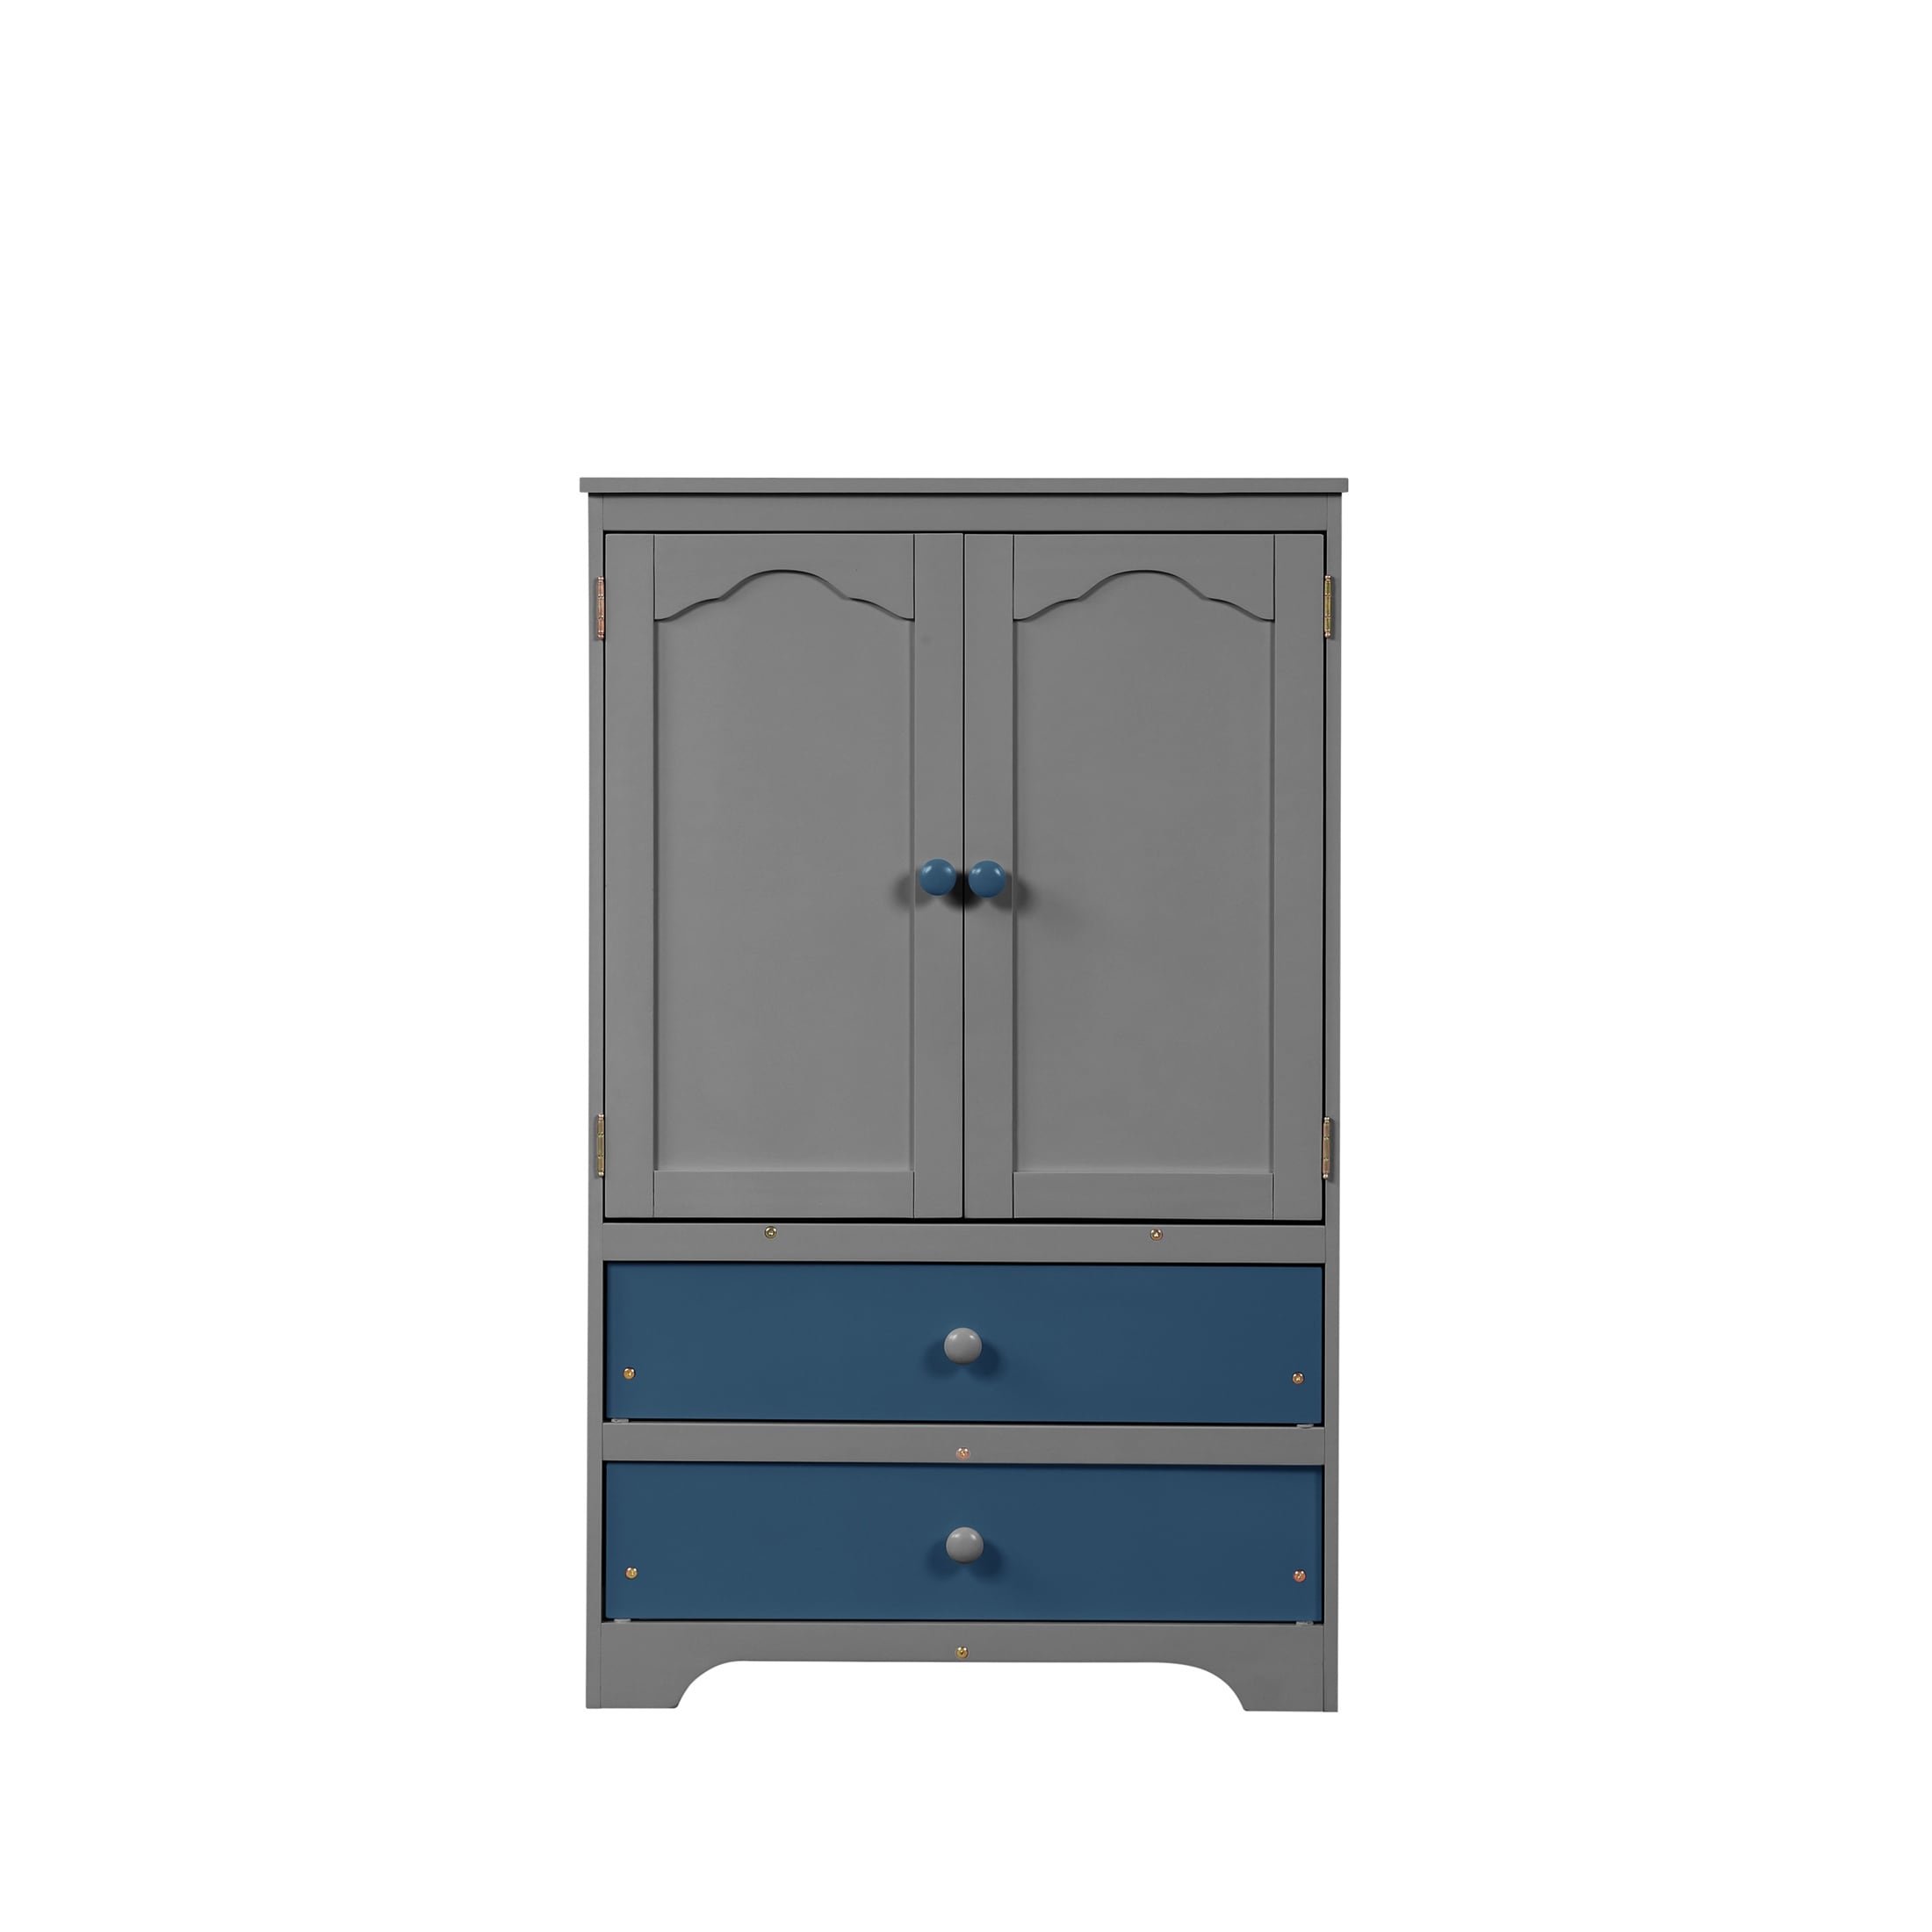 Practical Side Cabinet 2 Door Storage Cabinet with 2 Drawers